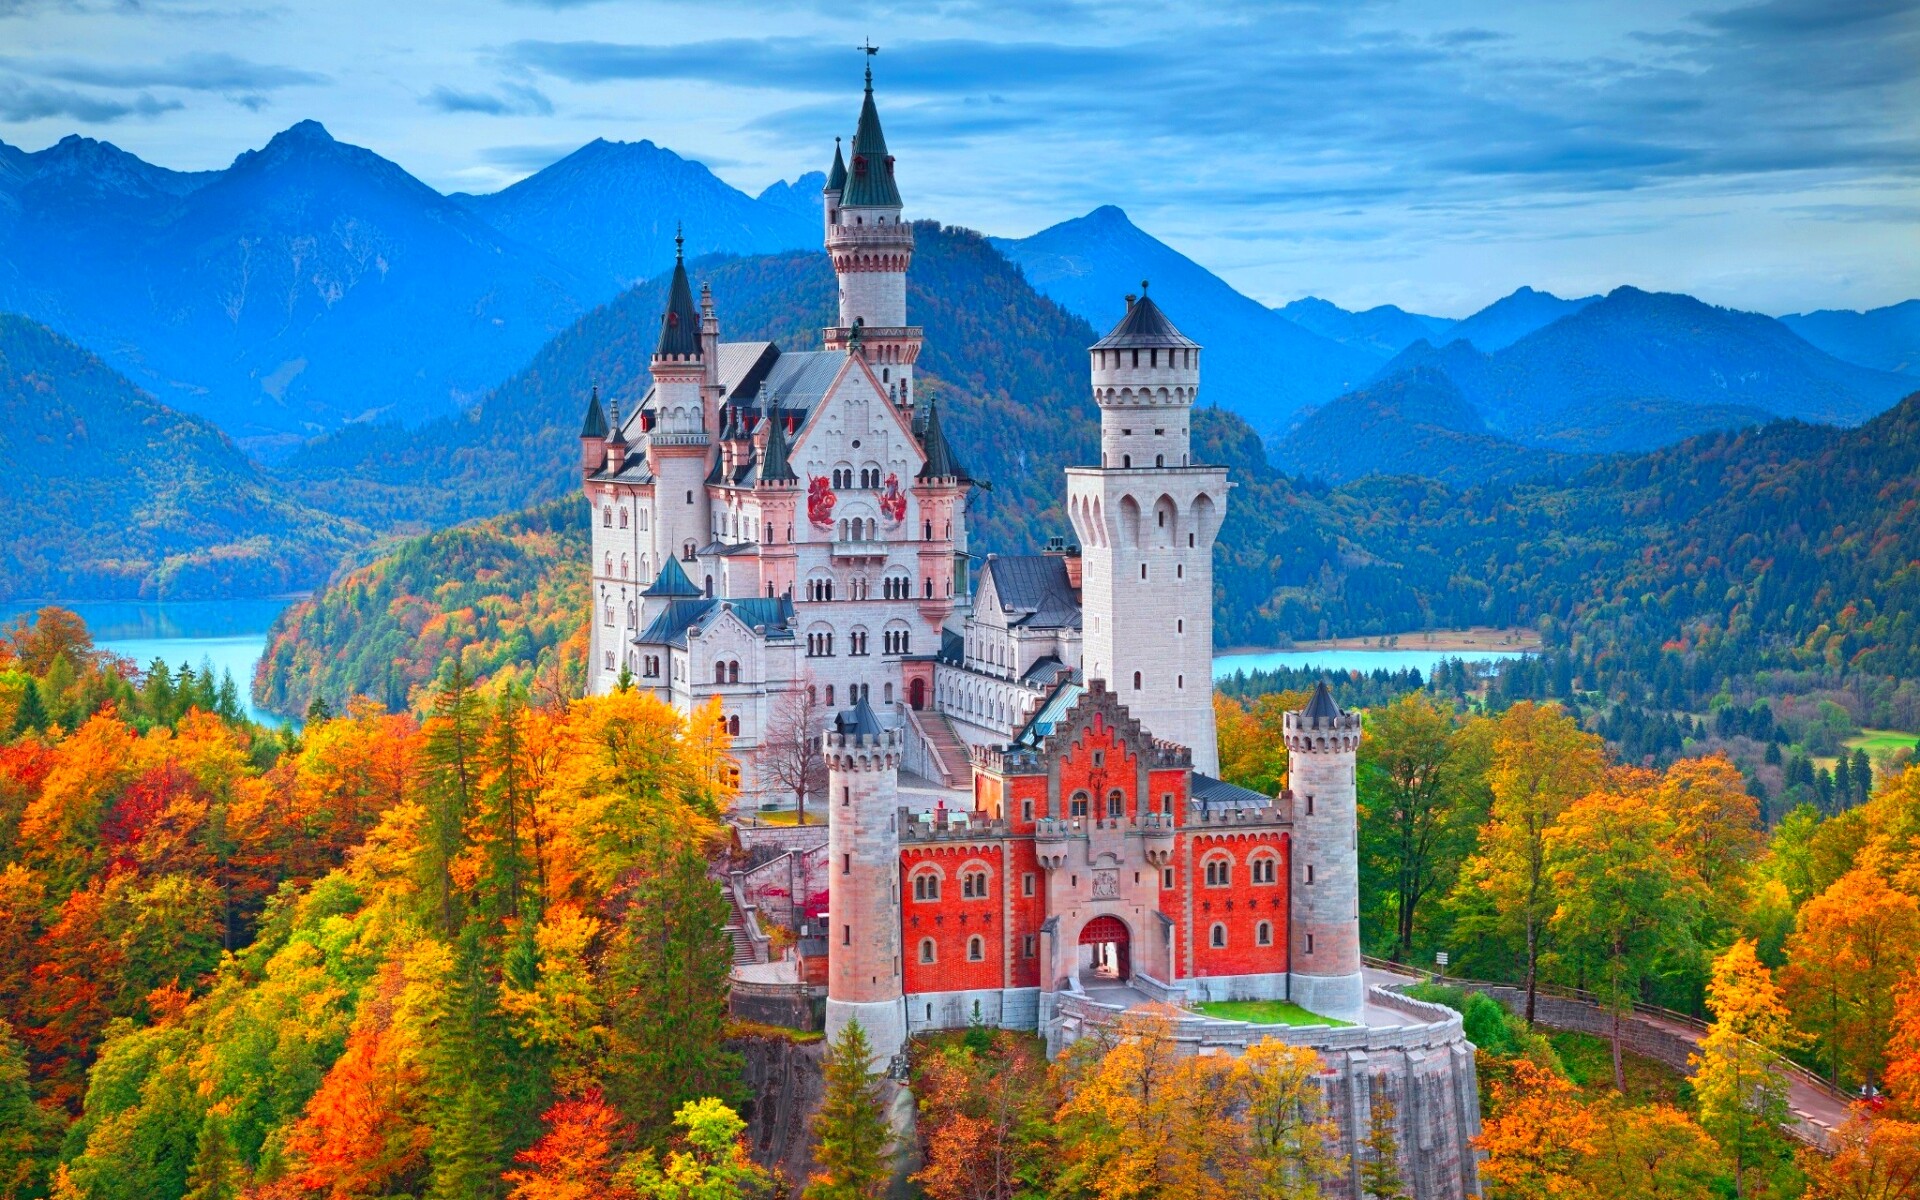 Neuschwanstein Castle: The palace, commissioned by King Ludwig II of Bavaria, First opened to the public in 1886. 1920x1200 HD Wallpaper.